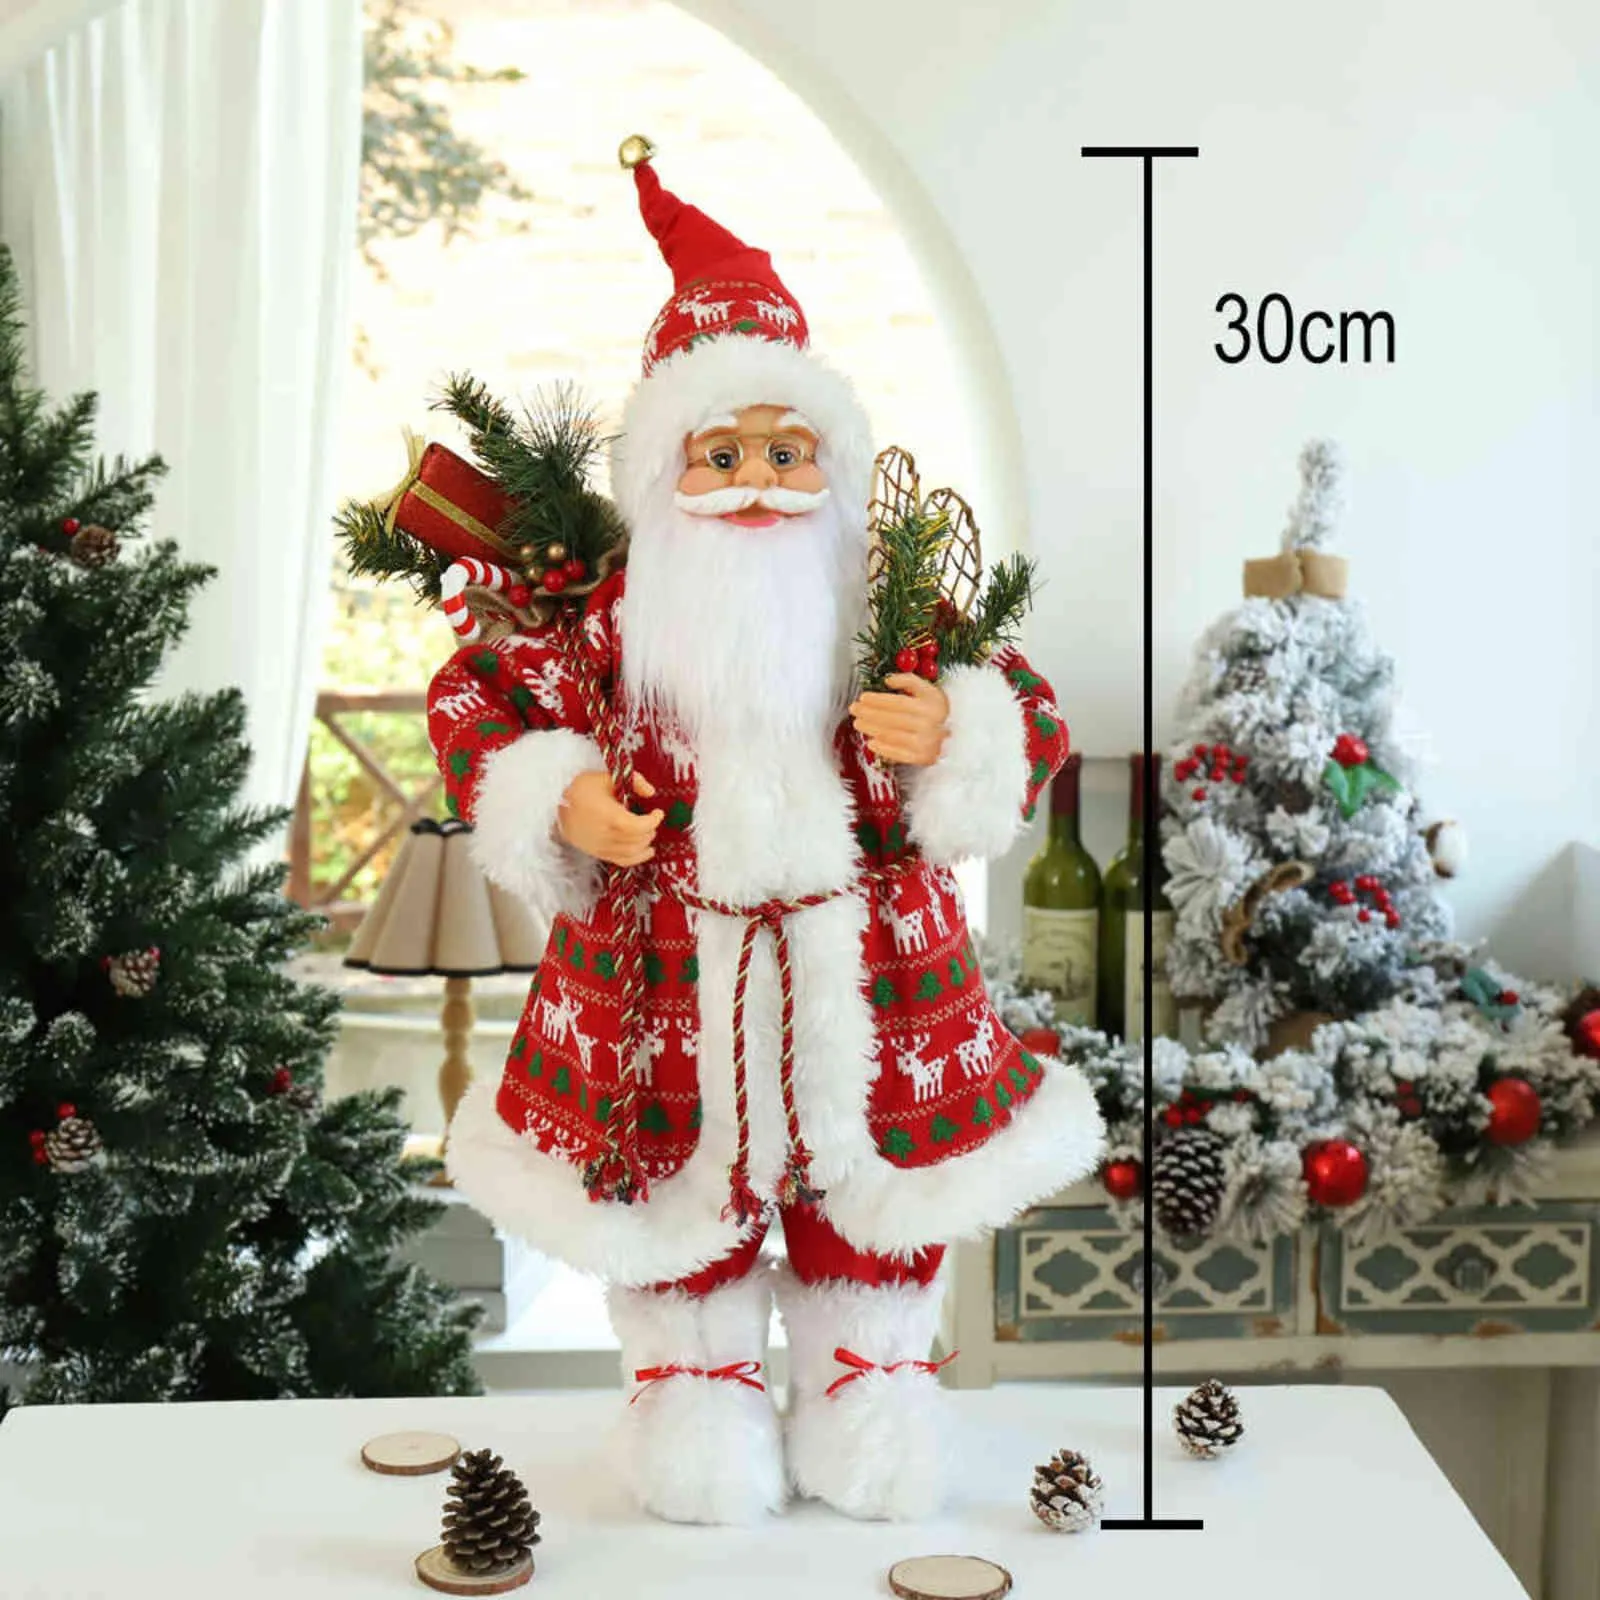 New Year 2022 Christmas Decorations for Home 25 Style Height 30cm Santa Claus doll Children`s gifts Window Ornaments Navidad H1112